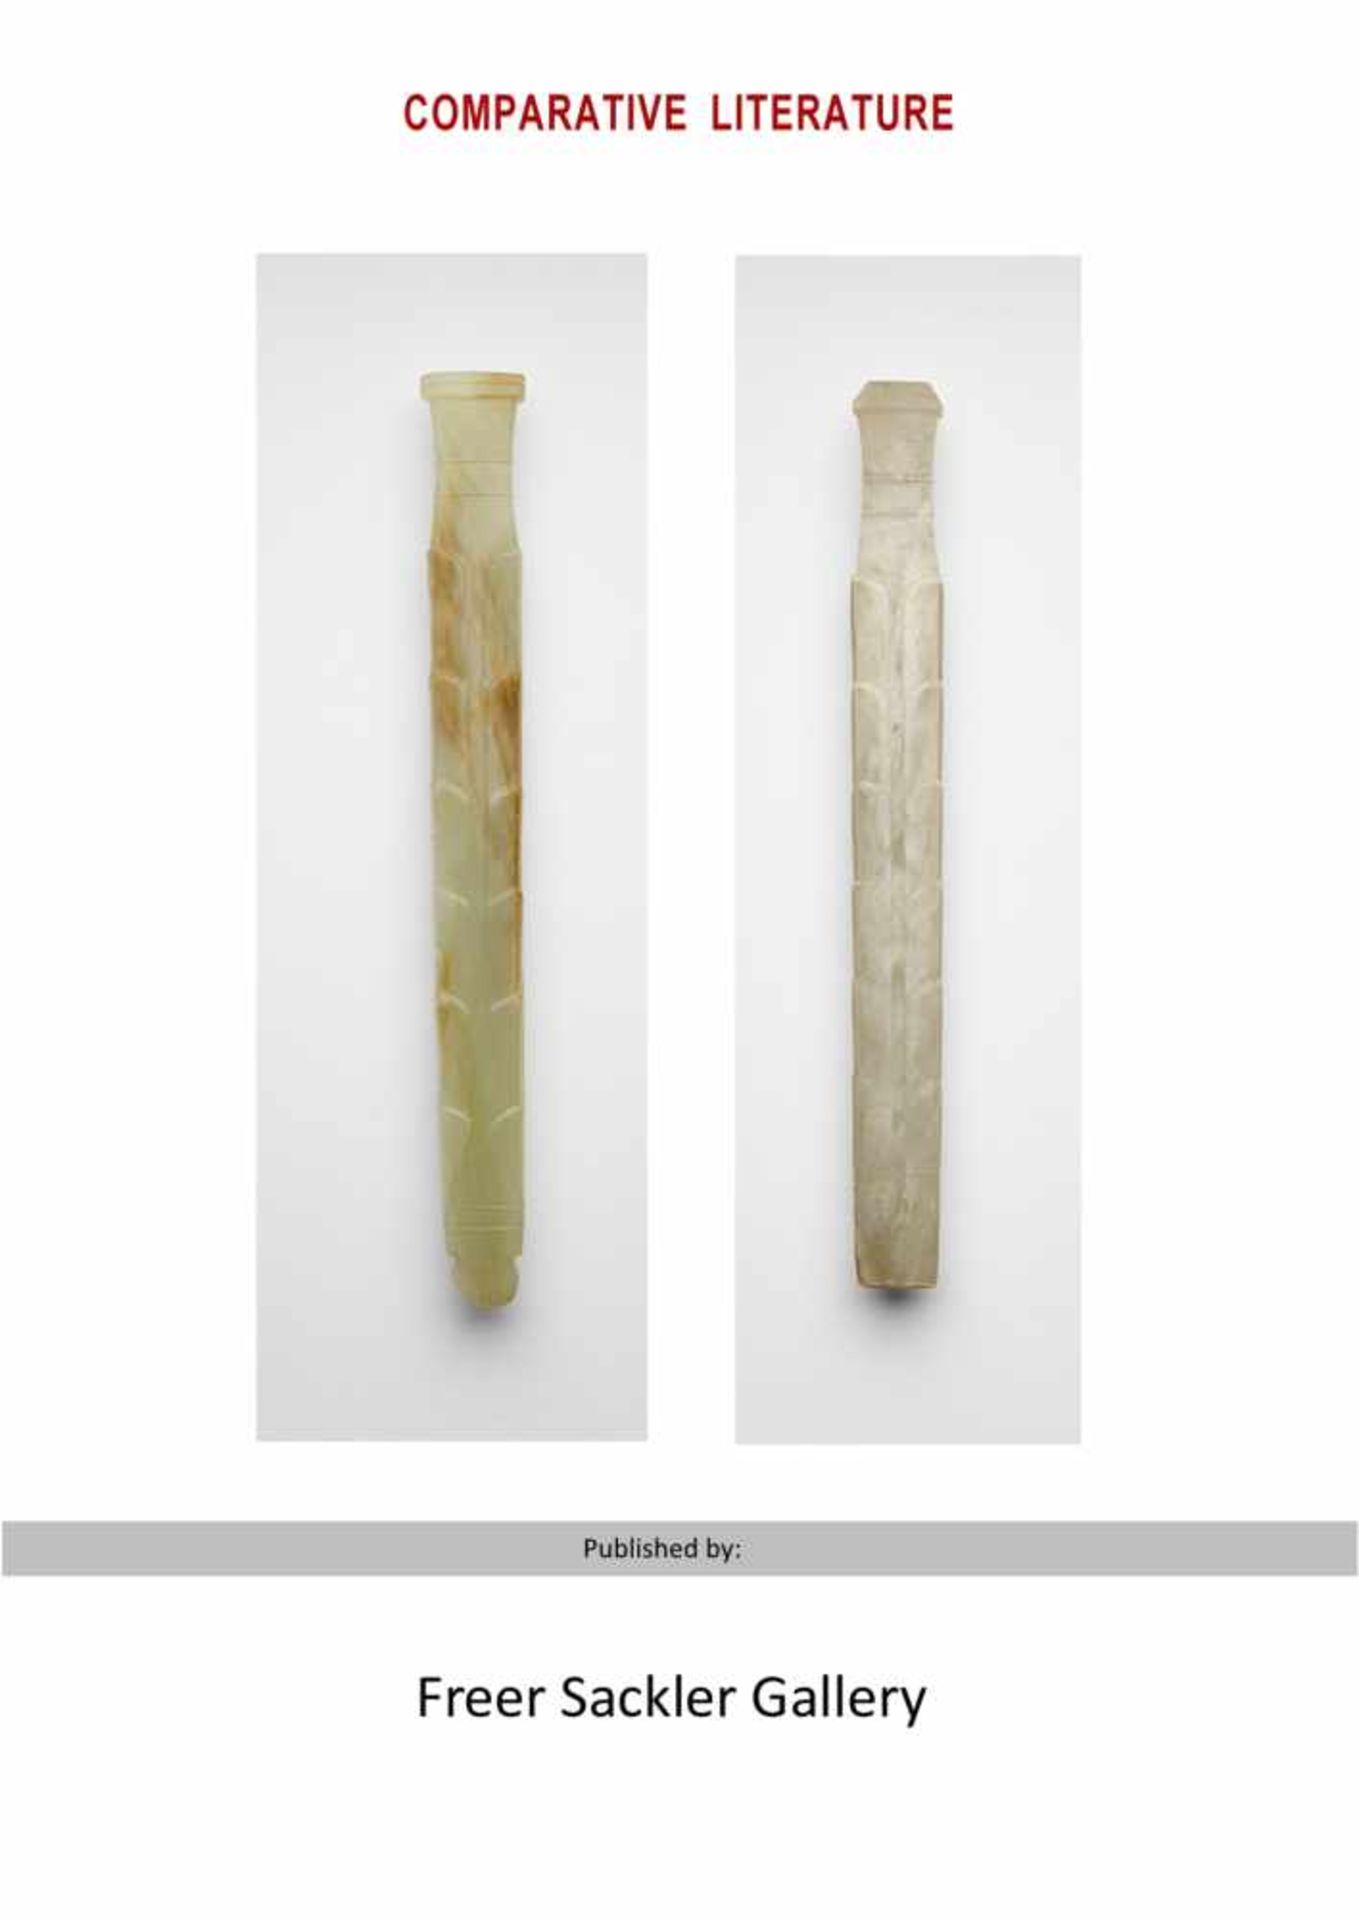 A SOPHISTICATED HANDLE-SHAPED OBJECT IN WHITE JADE DECORATED WITH LEAF PATTERNS Jade. China, Late - Image 6 of 7